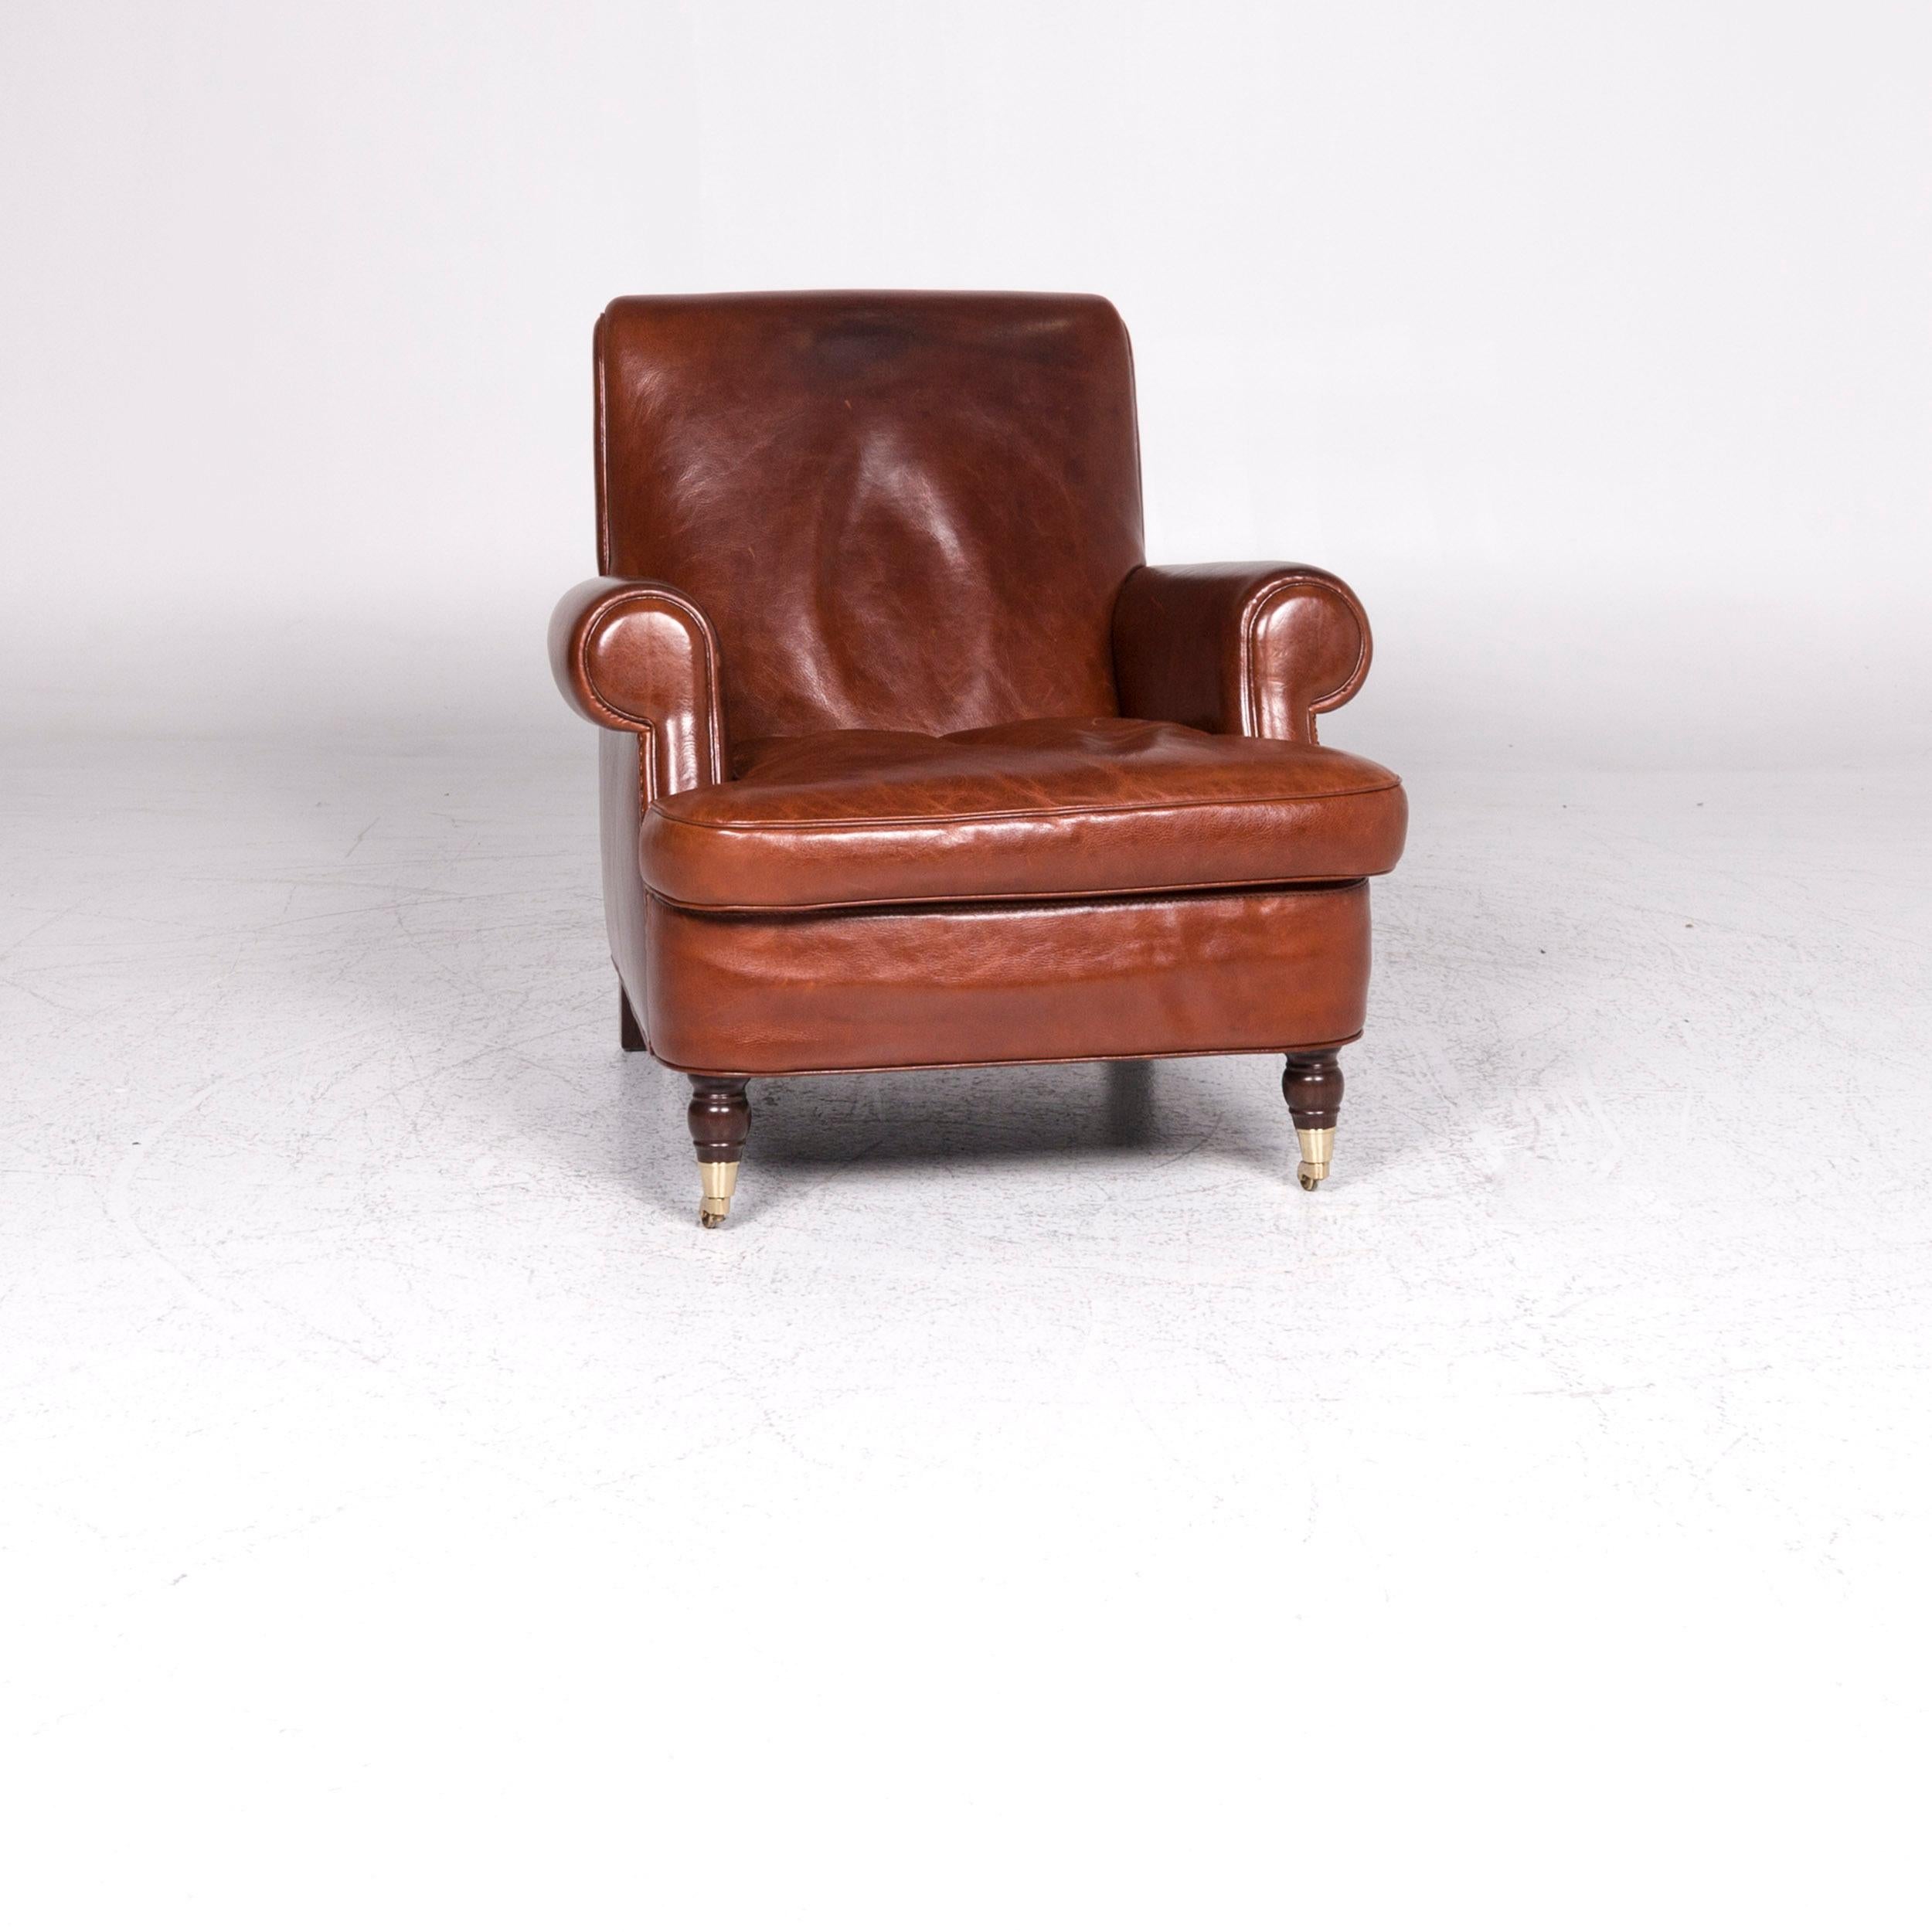 We bring to you a Baxter Charlotte designer leather armchair set brown.

 
 Product measurements in centimeters:
 
Depth: 109
Width: 86
Height: 91
Seat-height: 46
Rest-height: 62
Seat-depth: 62
Seat-width: 52
Back-height: 49.
 